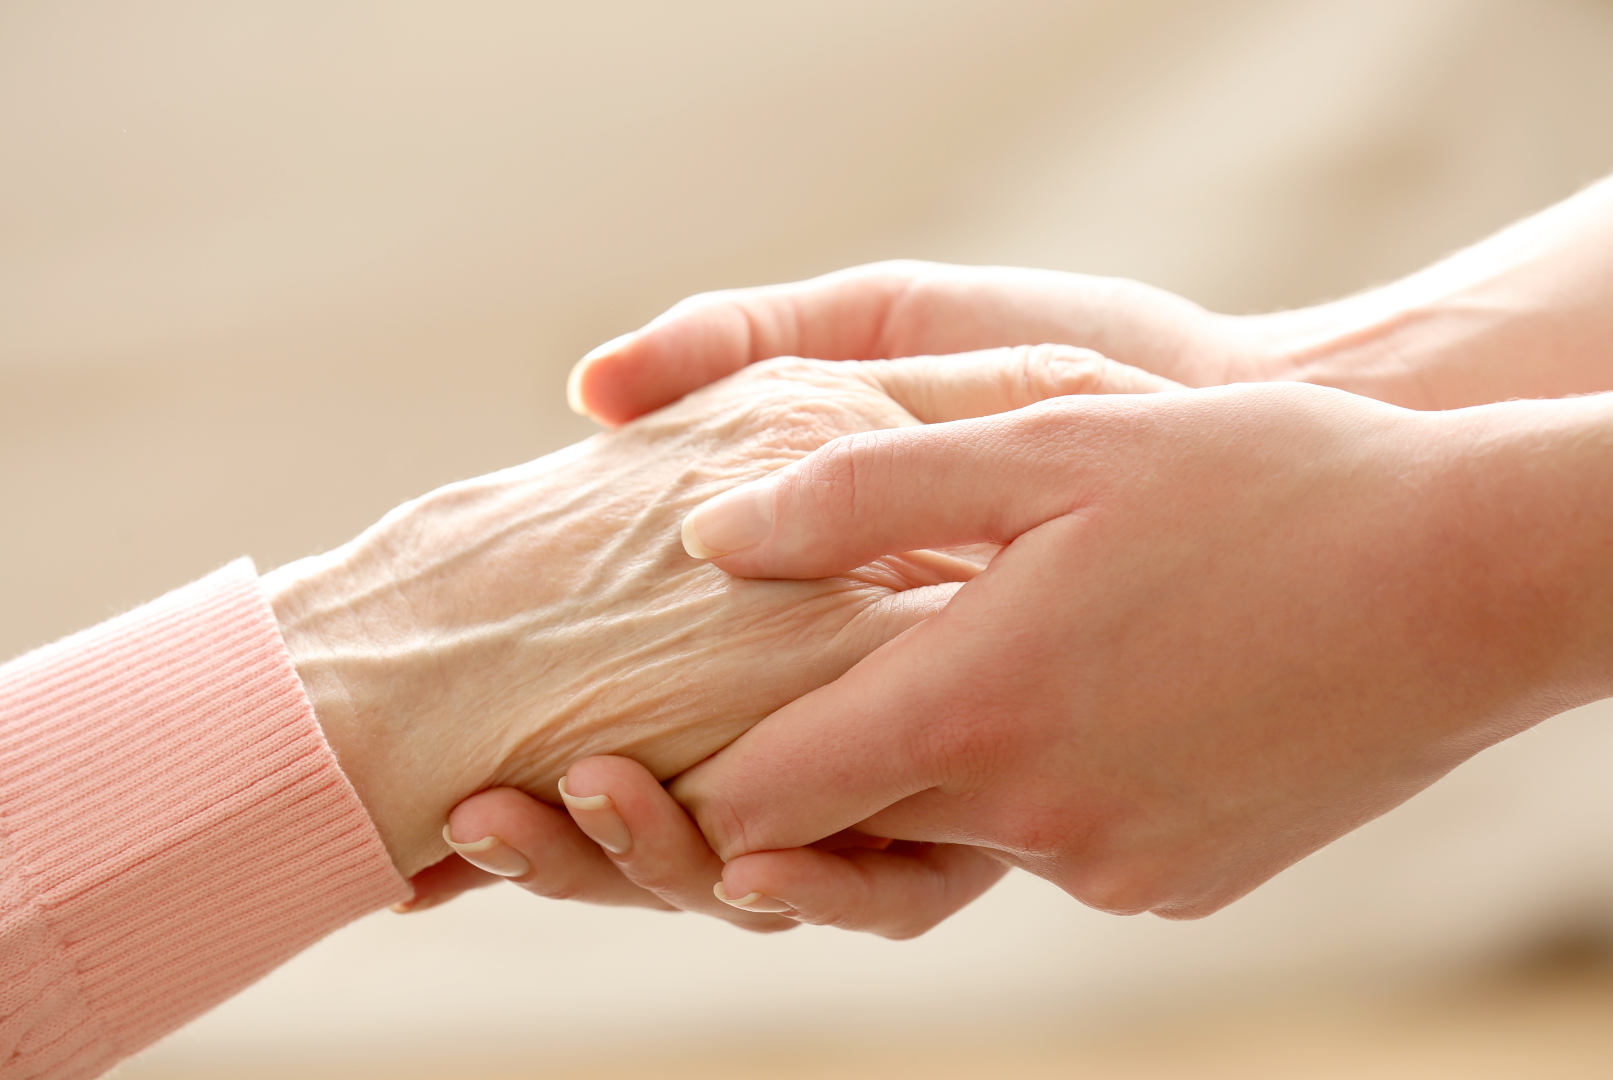 Module 7 – Providing Care and Support to the Elderly